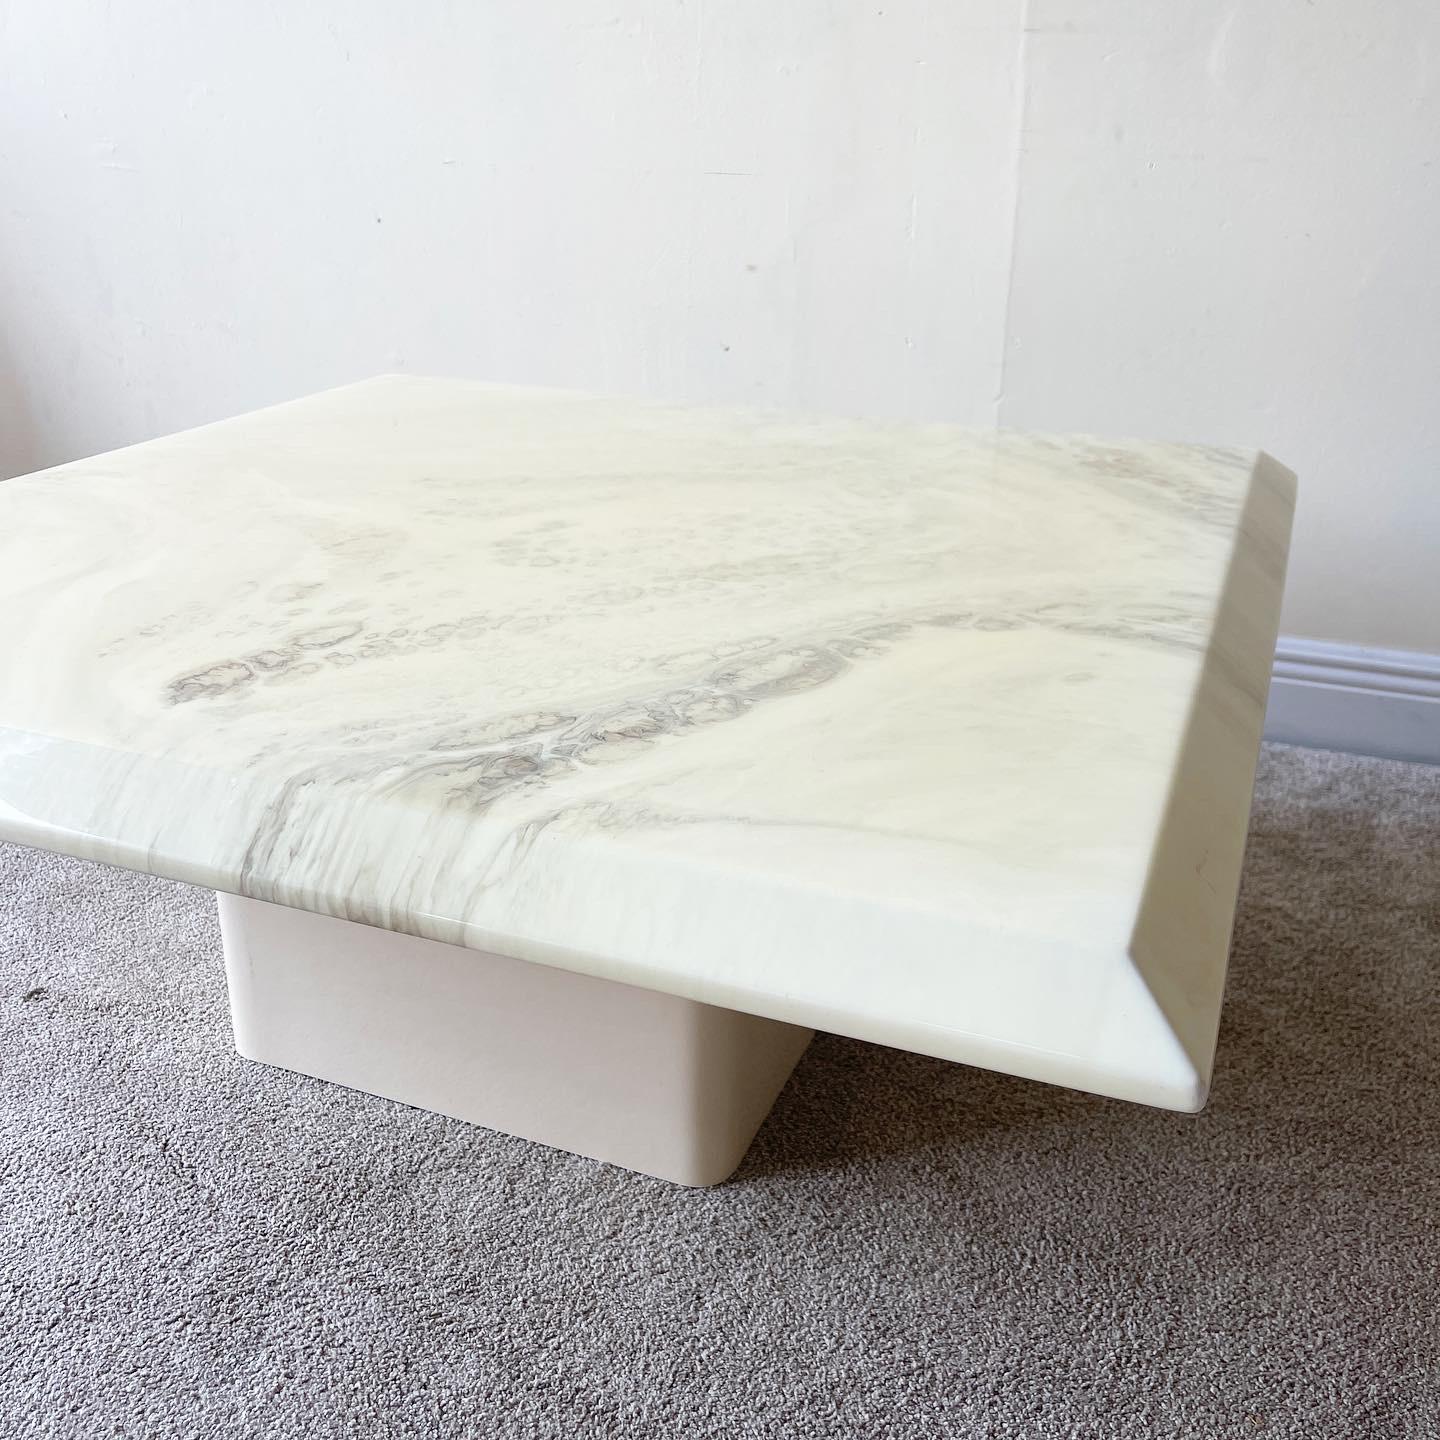 Incredible faux marble top square coffee table. Top is an epoxy over marbles design on a wood table. Table rests on off white lacquer laminate base.

Additional information:
Material: Wood
Color: Cream
Style: Postmodern
Time Period: